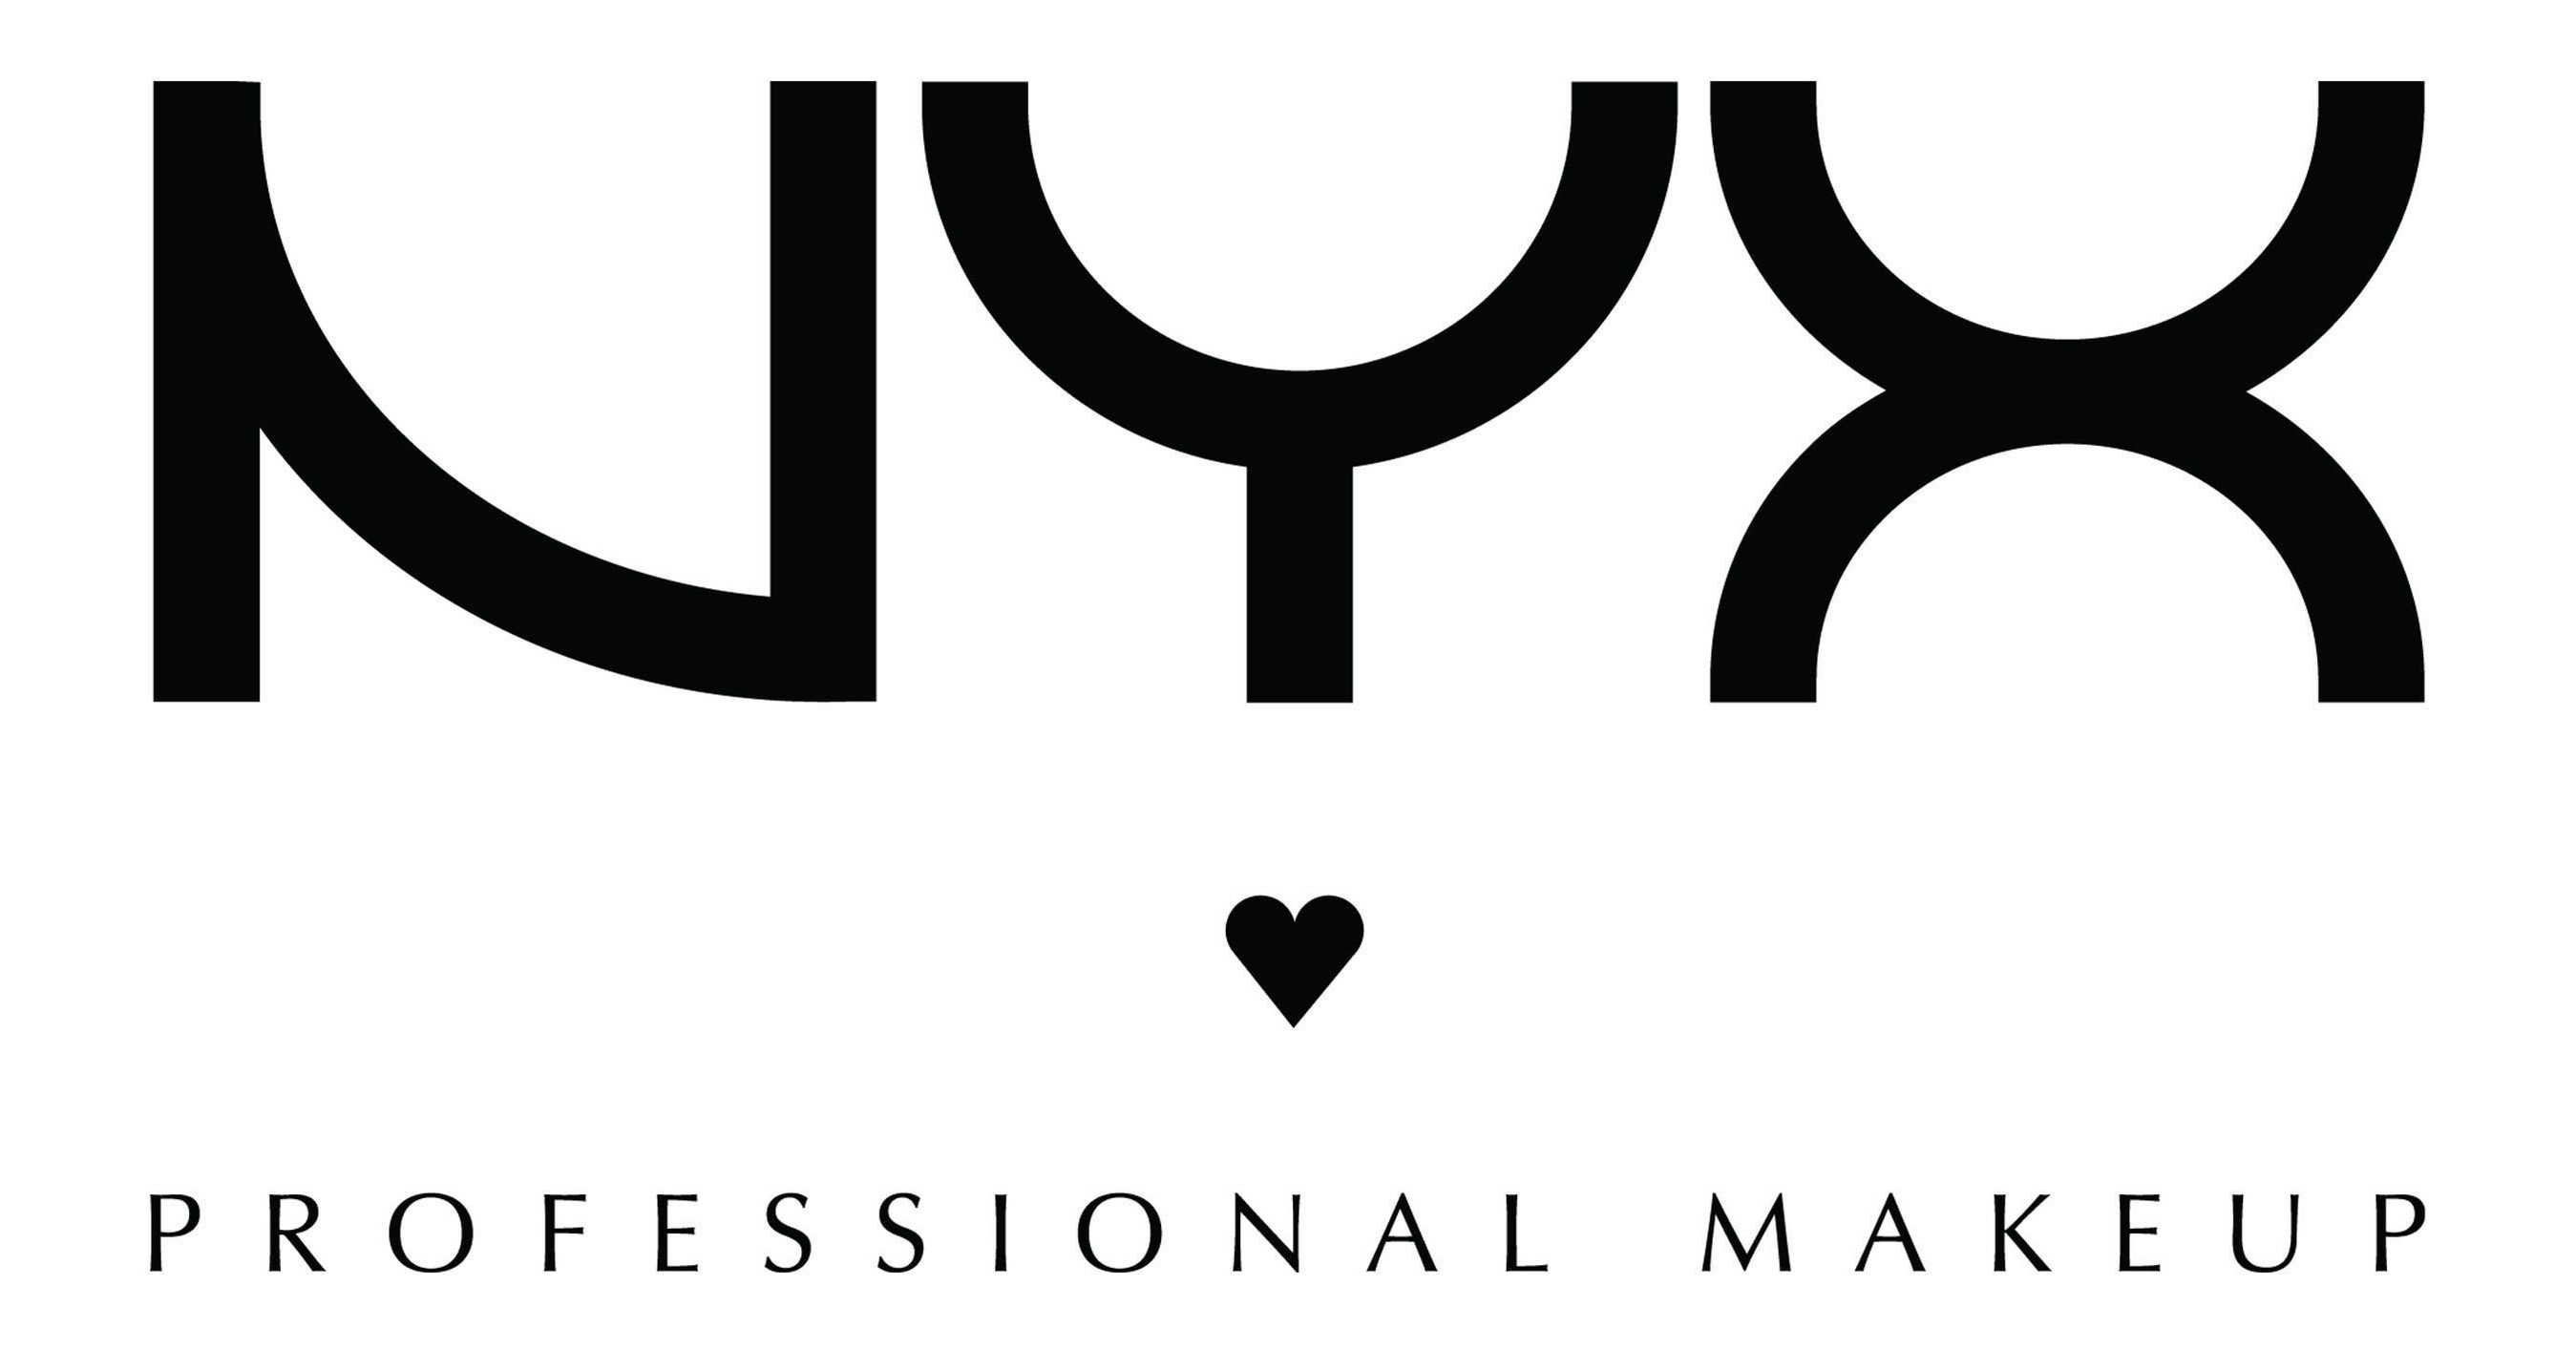 NYX PROFESSIONAL MAKEUP LAUNCHES LATEST EXPANSION INTO THE METAVERSE WITH  'HOUSE OF NYX PROFESSIONAL MAKEUP' IN IHEARTLAND ON ROBLOX